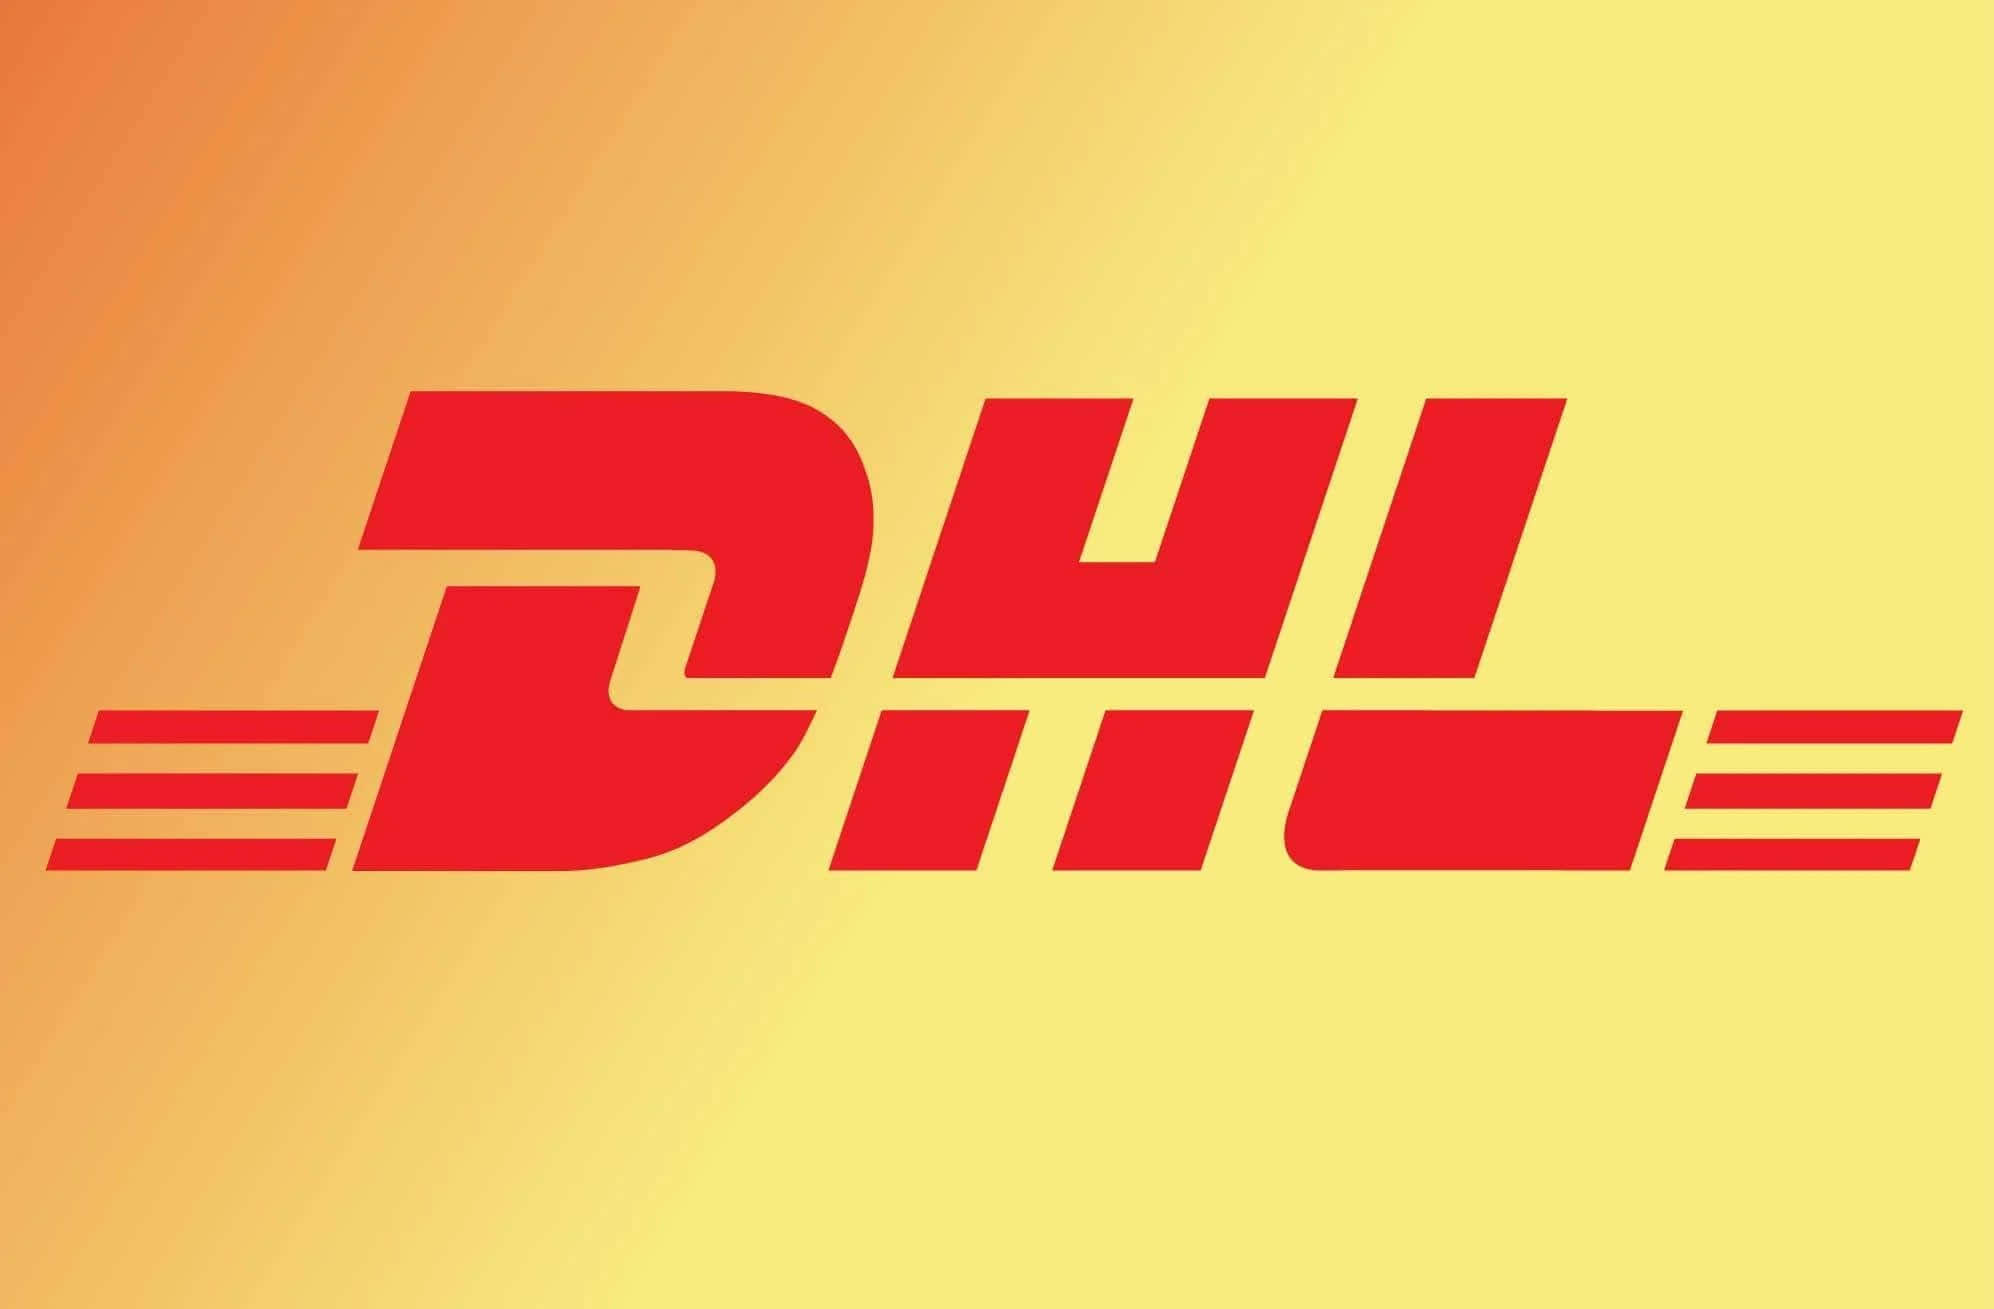 “Get Ready to Ship with DHL Express”